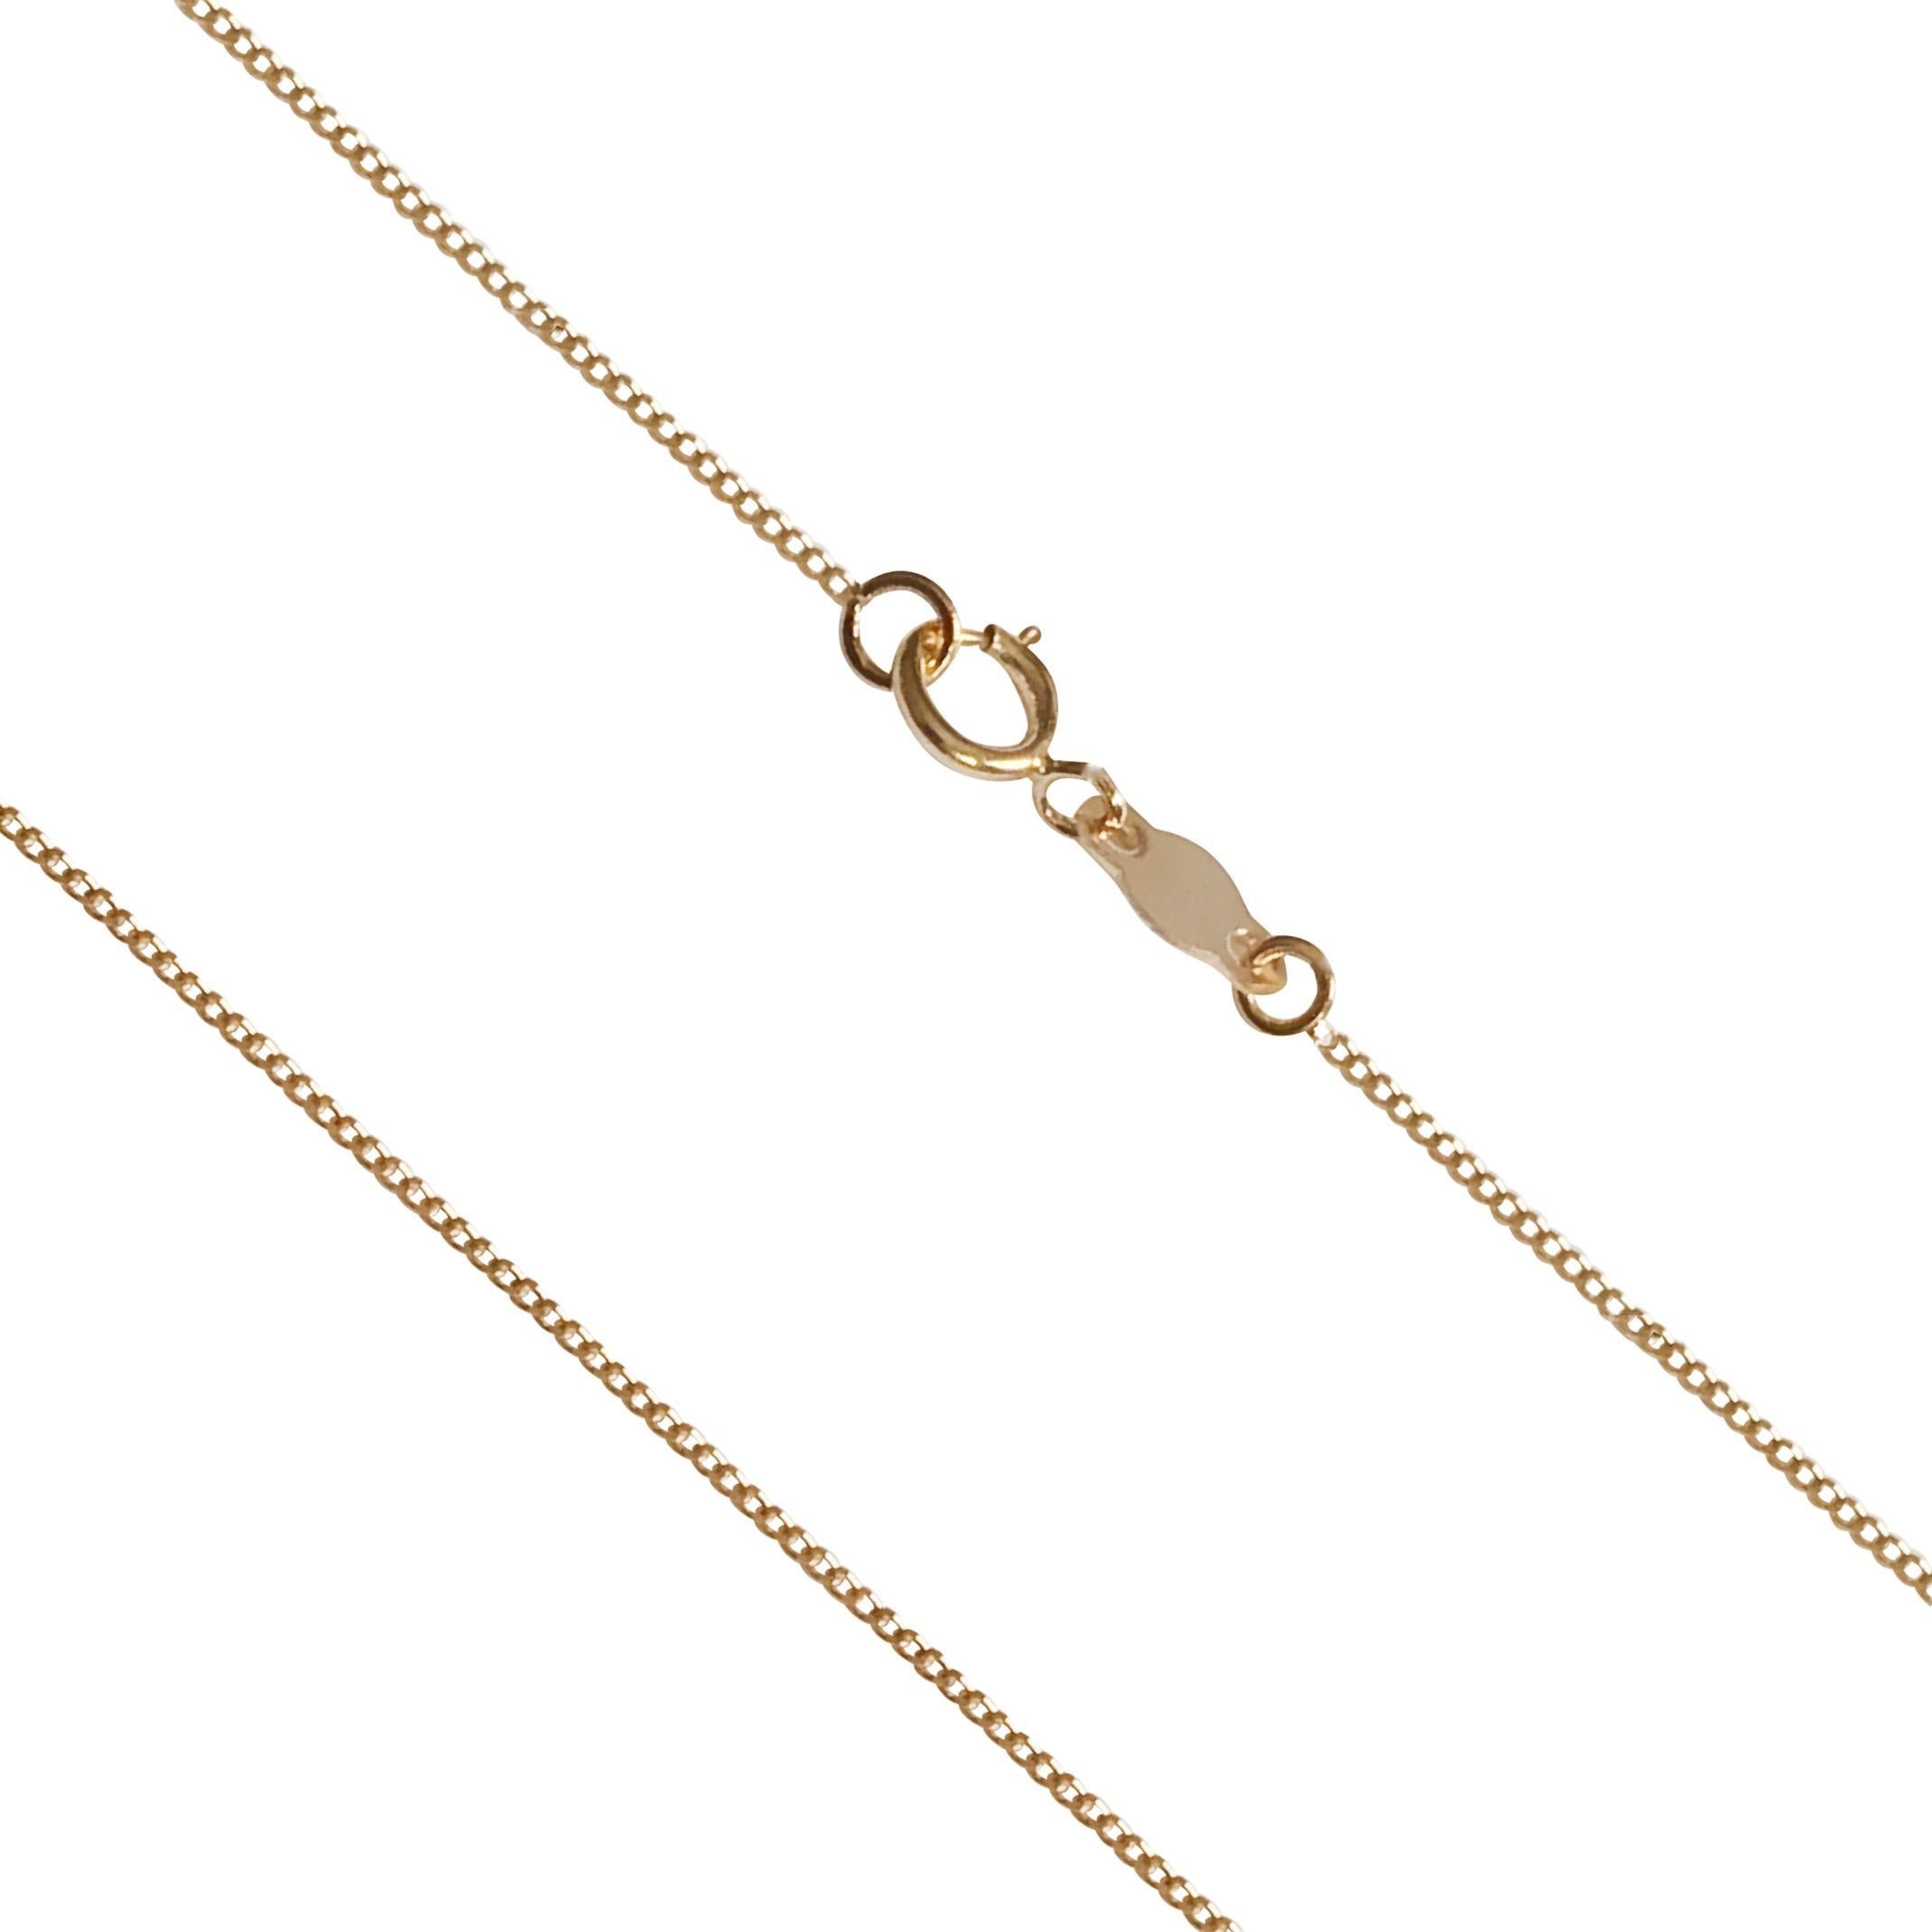 This fine chain necklace is made of 18 Karat solid yellow gold and is the lightest chain in our entire collection.
Hallmark: London’s  Goldsmiths’ Company –  Assay Office
Length:40.00cm
Width: 0.7mm
Weight: 1.25g
All our jewellery are new and have